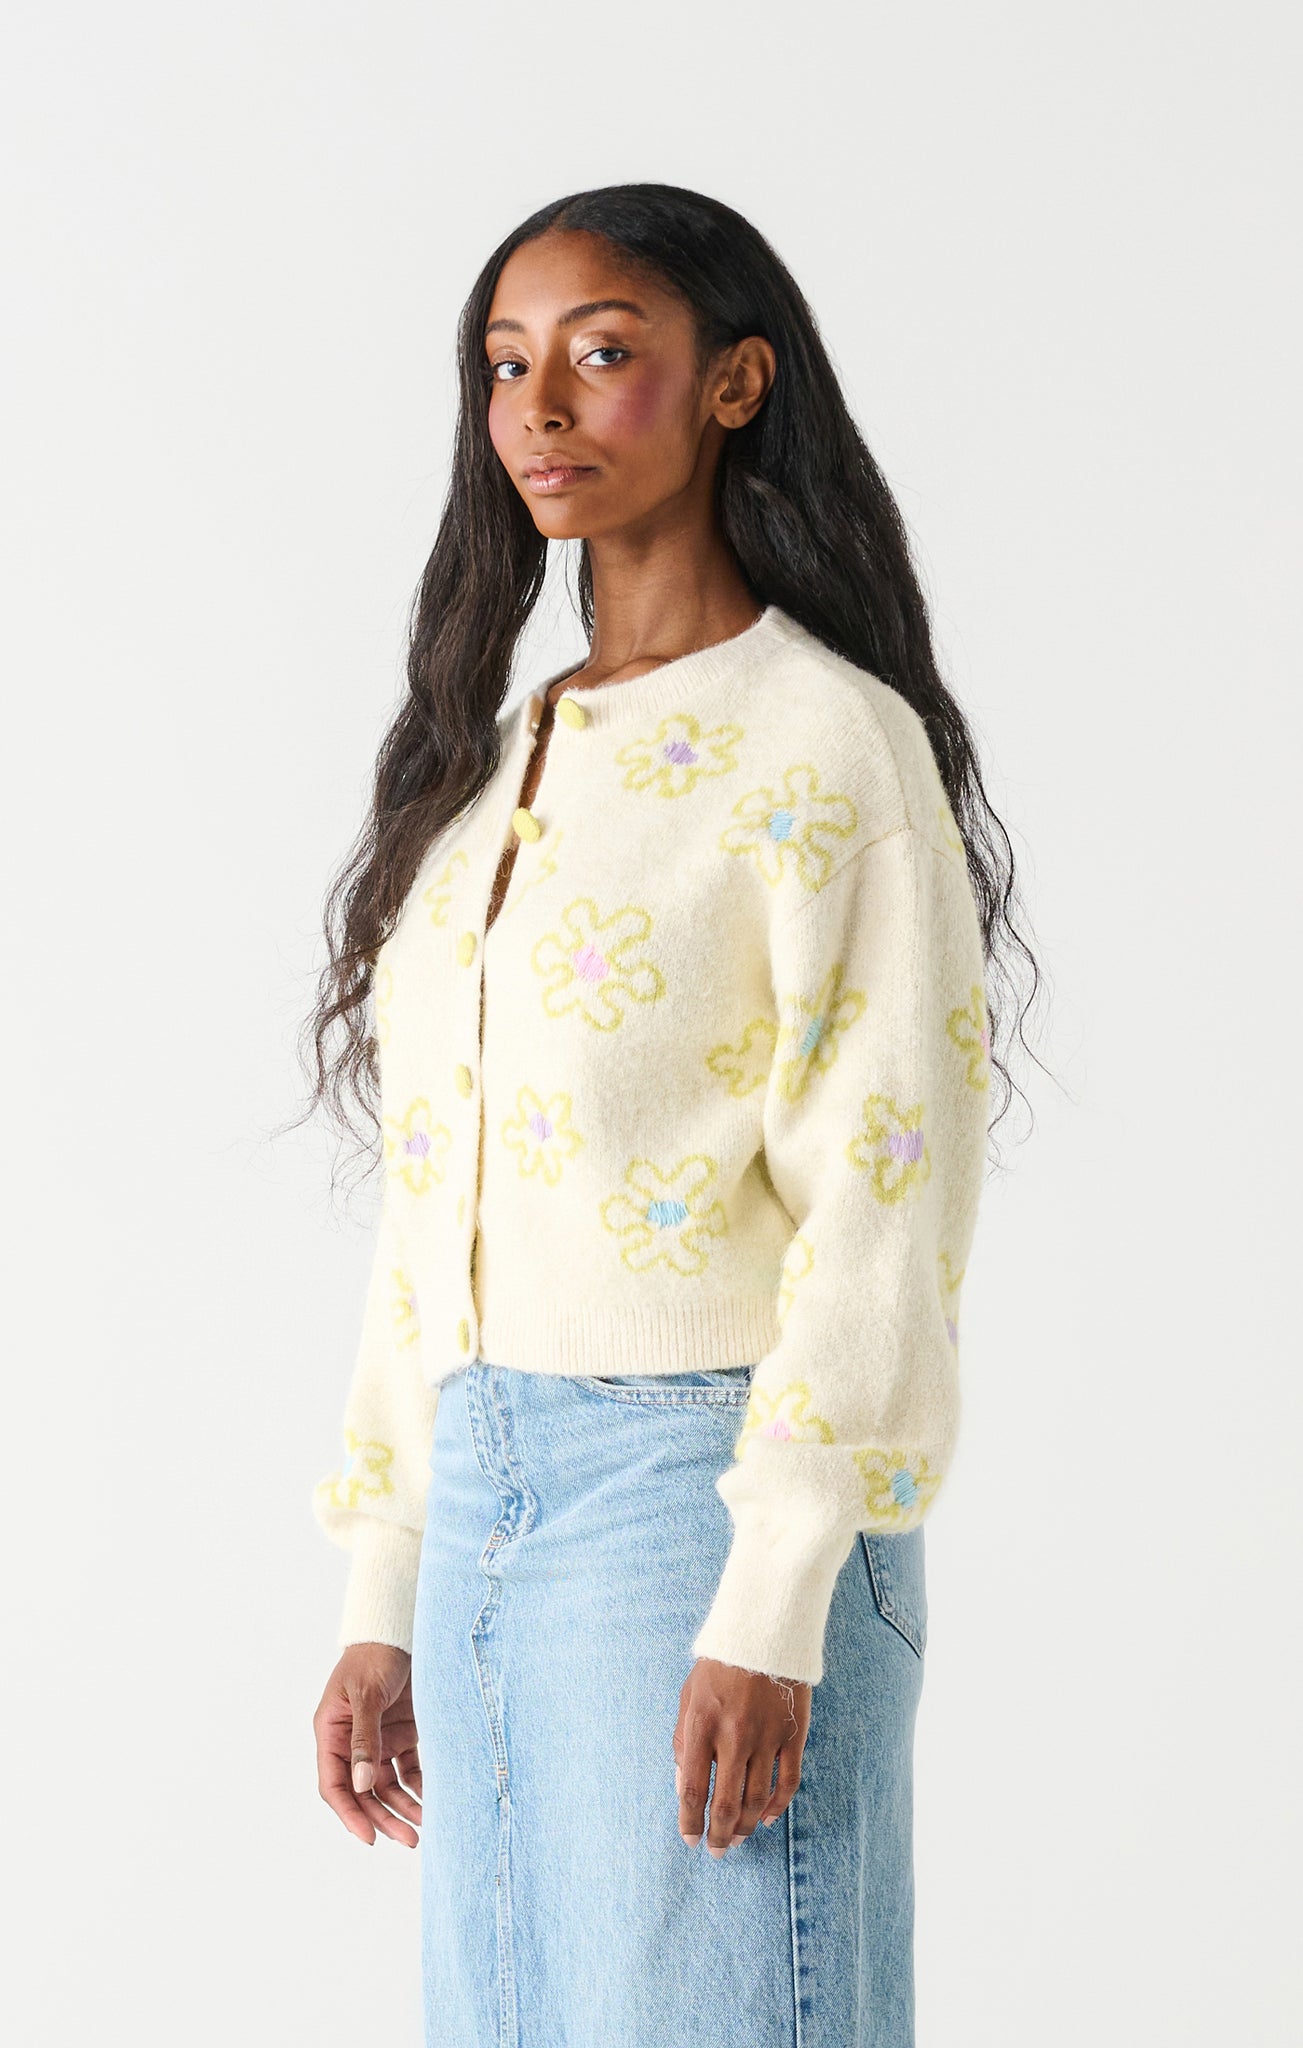 Floral Embroidered Cardigan - Dex